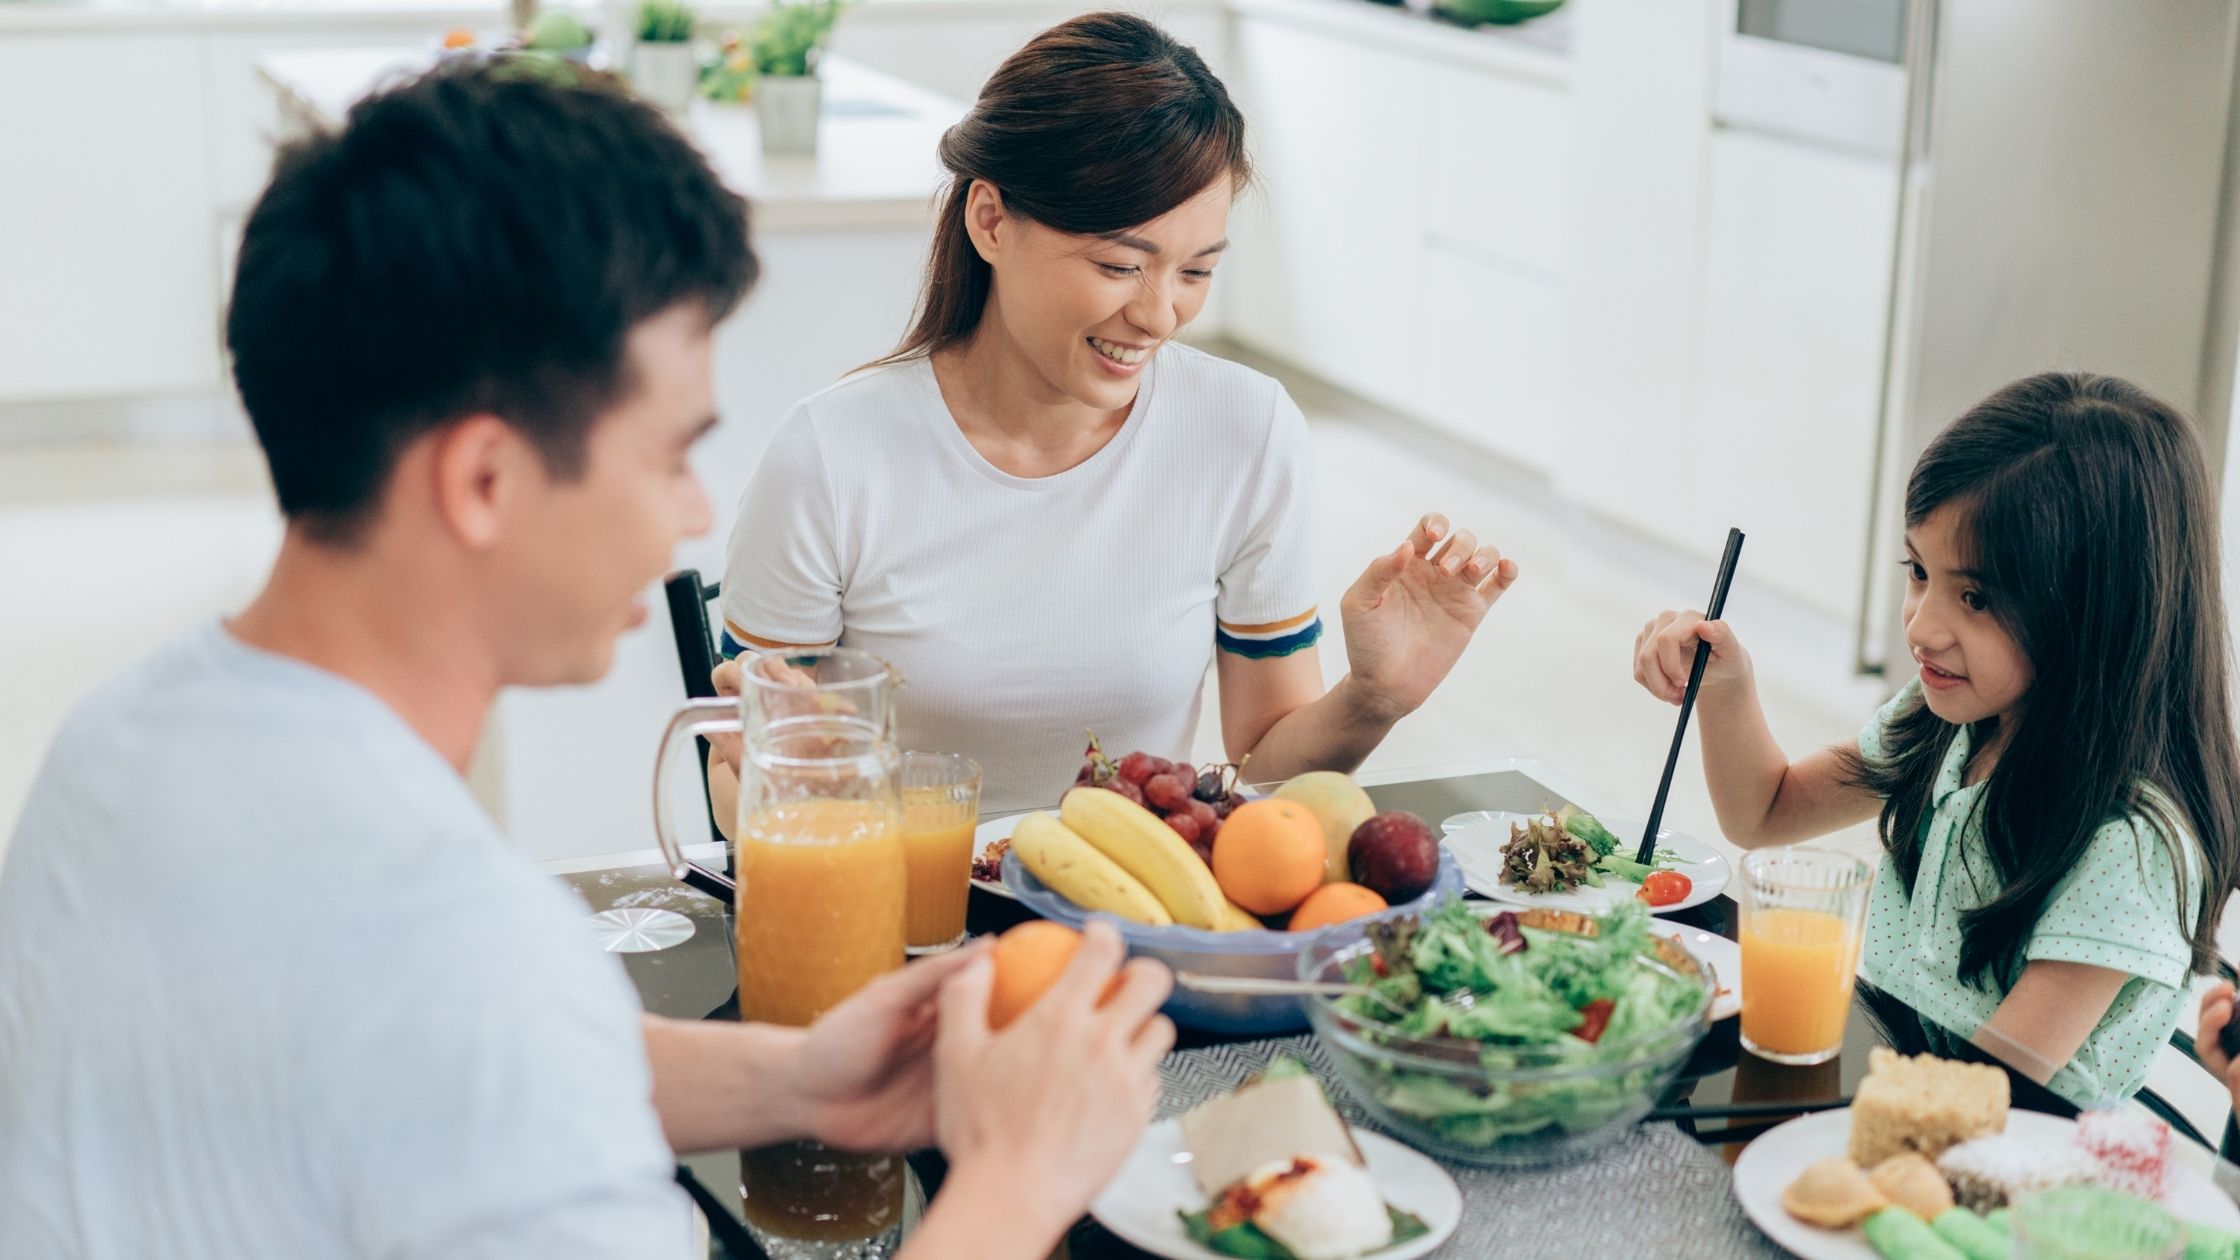 10 Ways to Sneak Some Extra Fruits and Vegetables in Your Family’s Diet